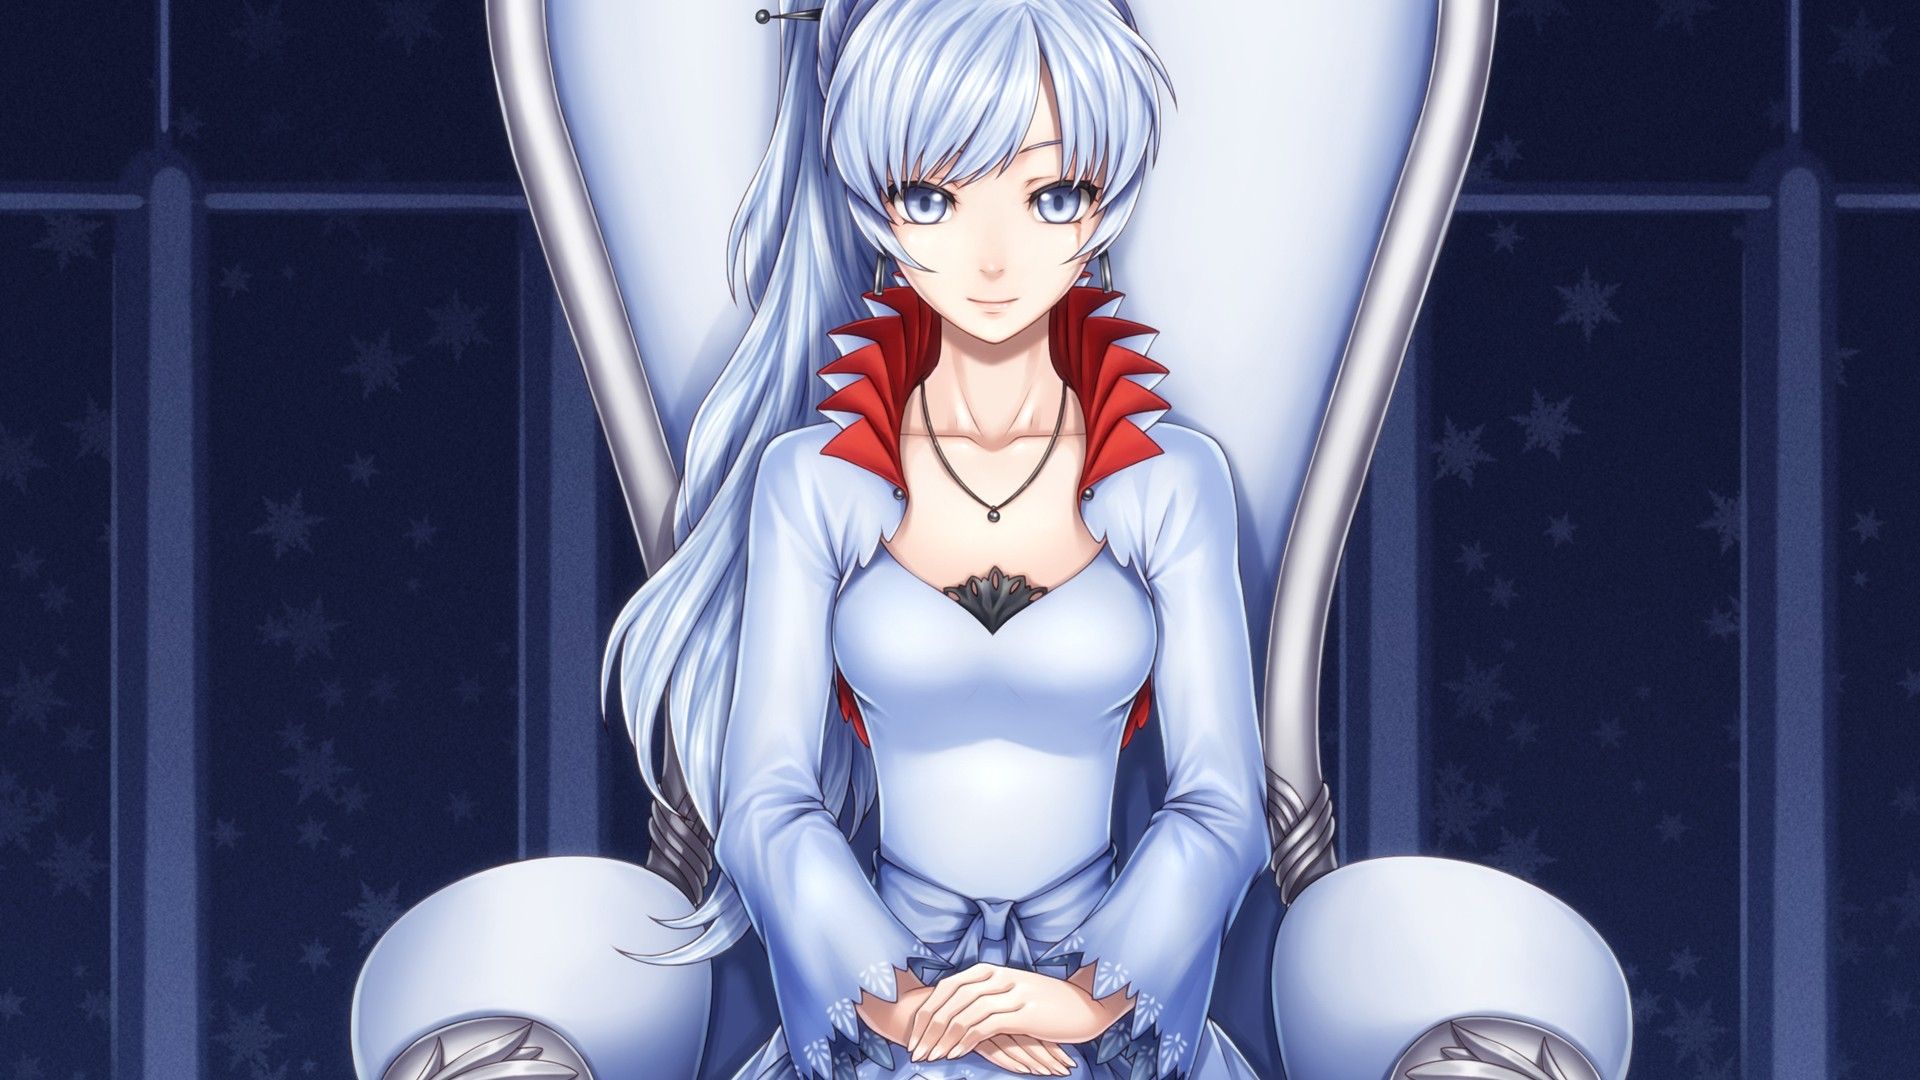 Schnee (Character) – aniSearch.com